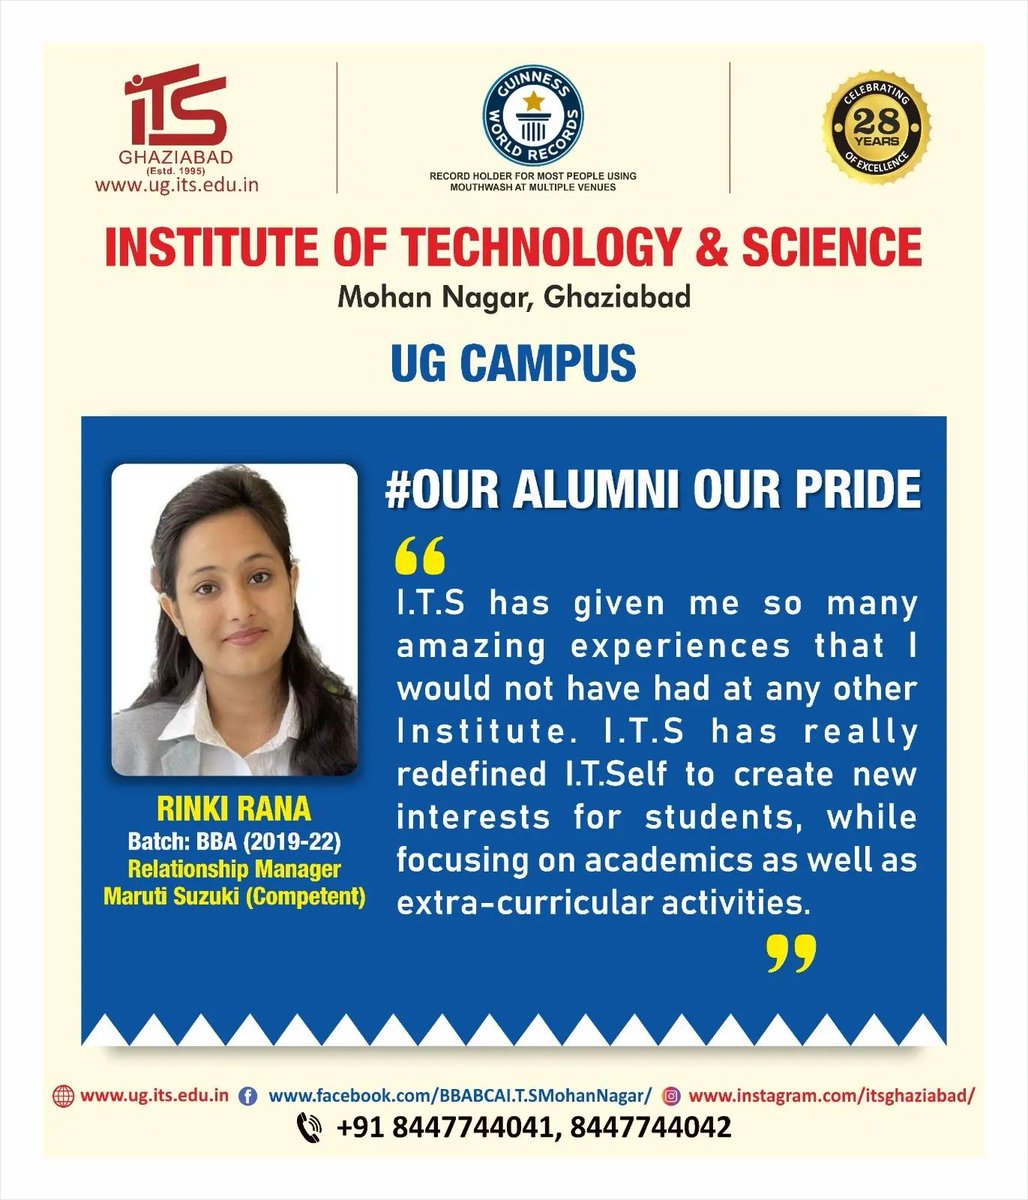 #ouralumniourpride
Rinki Rana, Alumni of BBA Batch 2019-2022 shared her experience about I.T.S Mohan Nagar Ghaziabad UG campus.